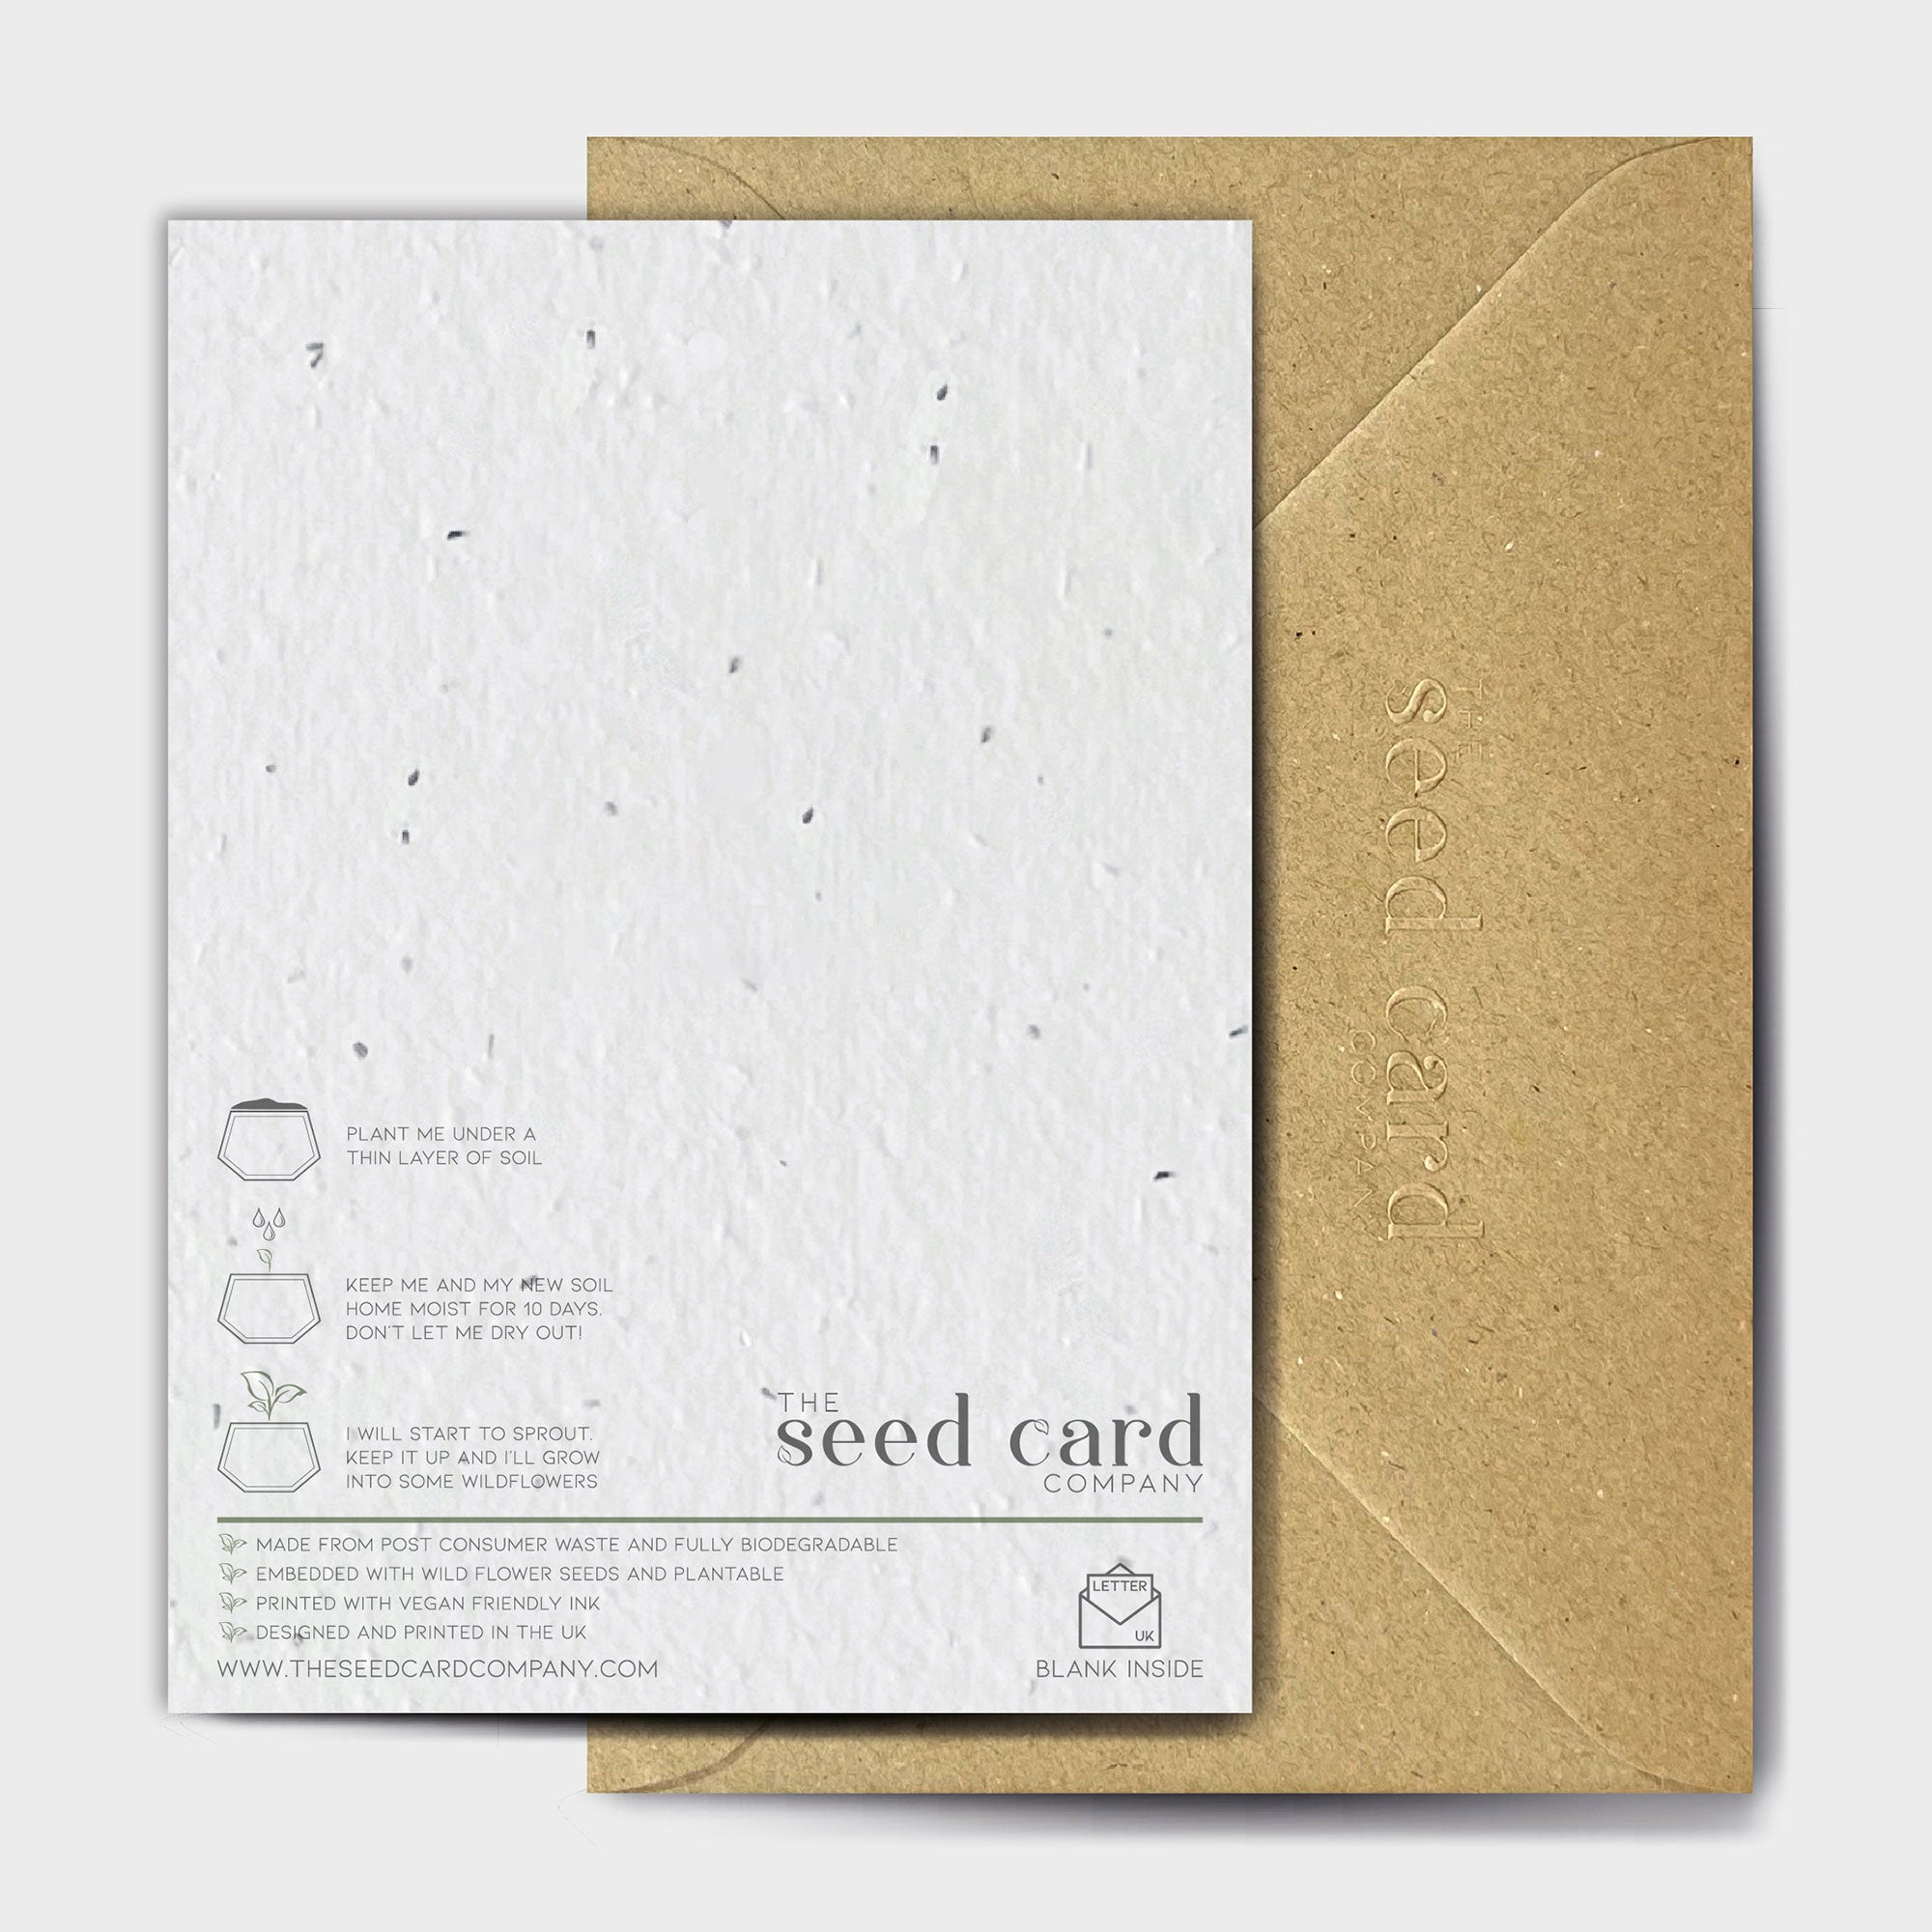 Shop online Trevor's First Card! - 100% biodegradable seed-embedded cards Shop -The Seed Card Company